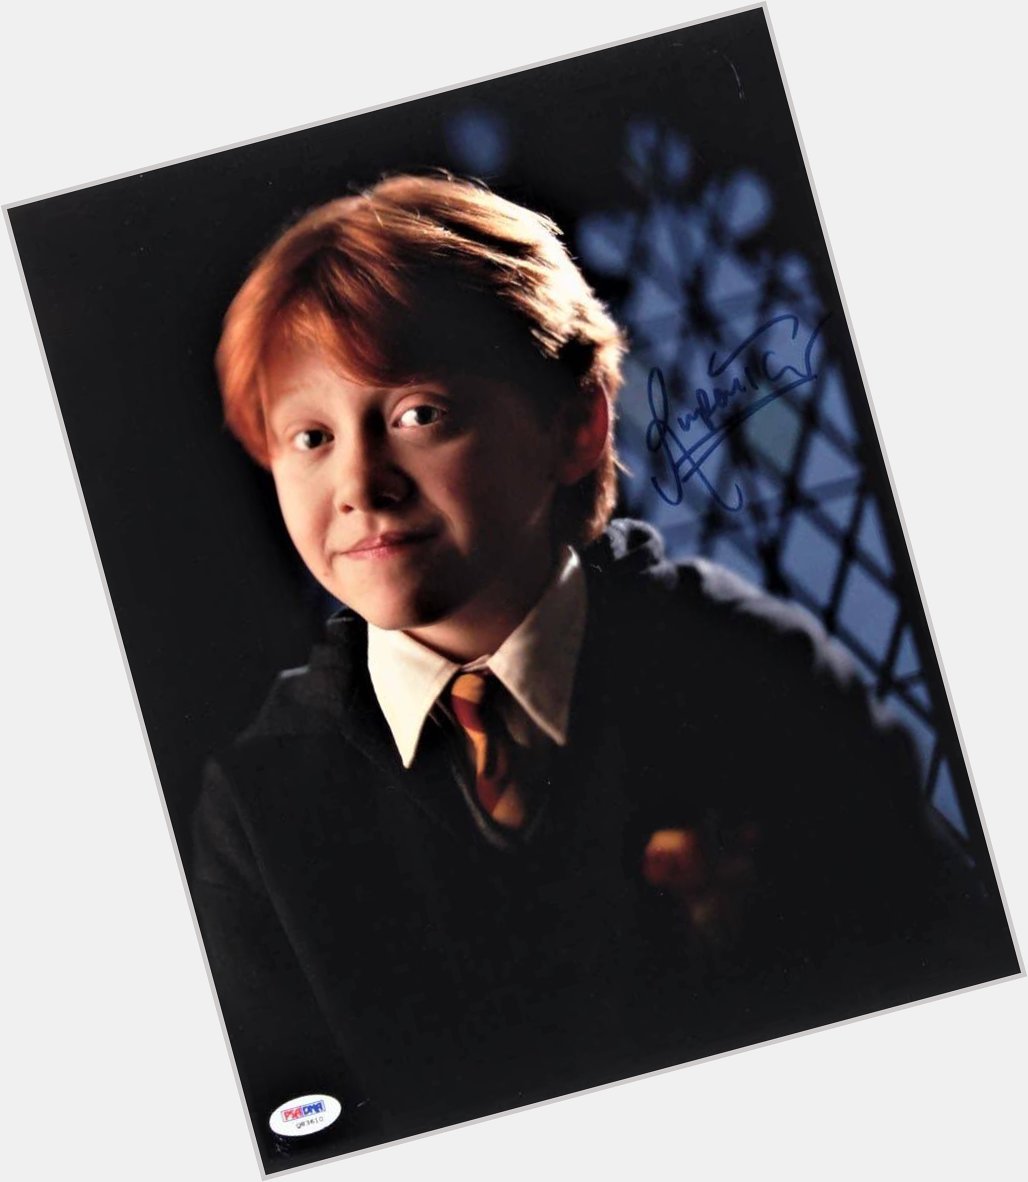 Happy Birthday to actor and producer Rupert Grint born on August 24, 1988 